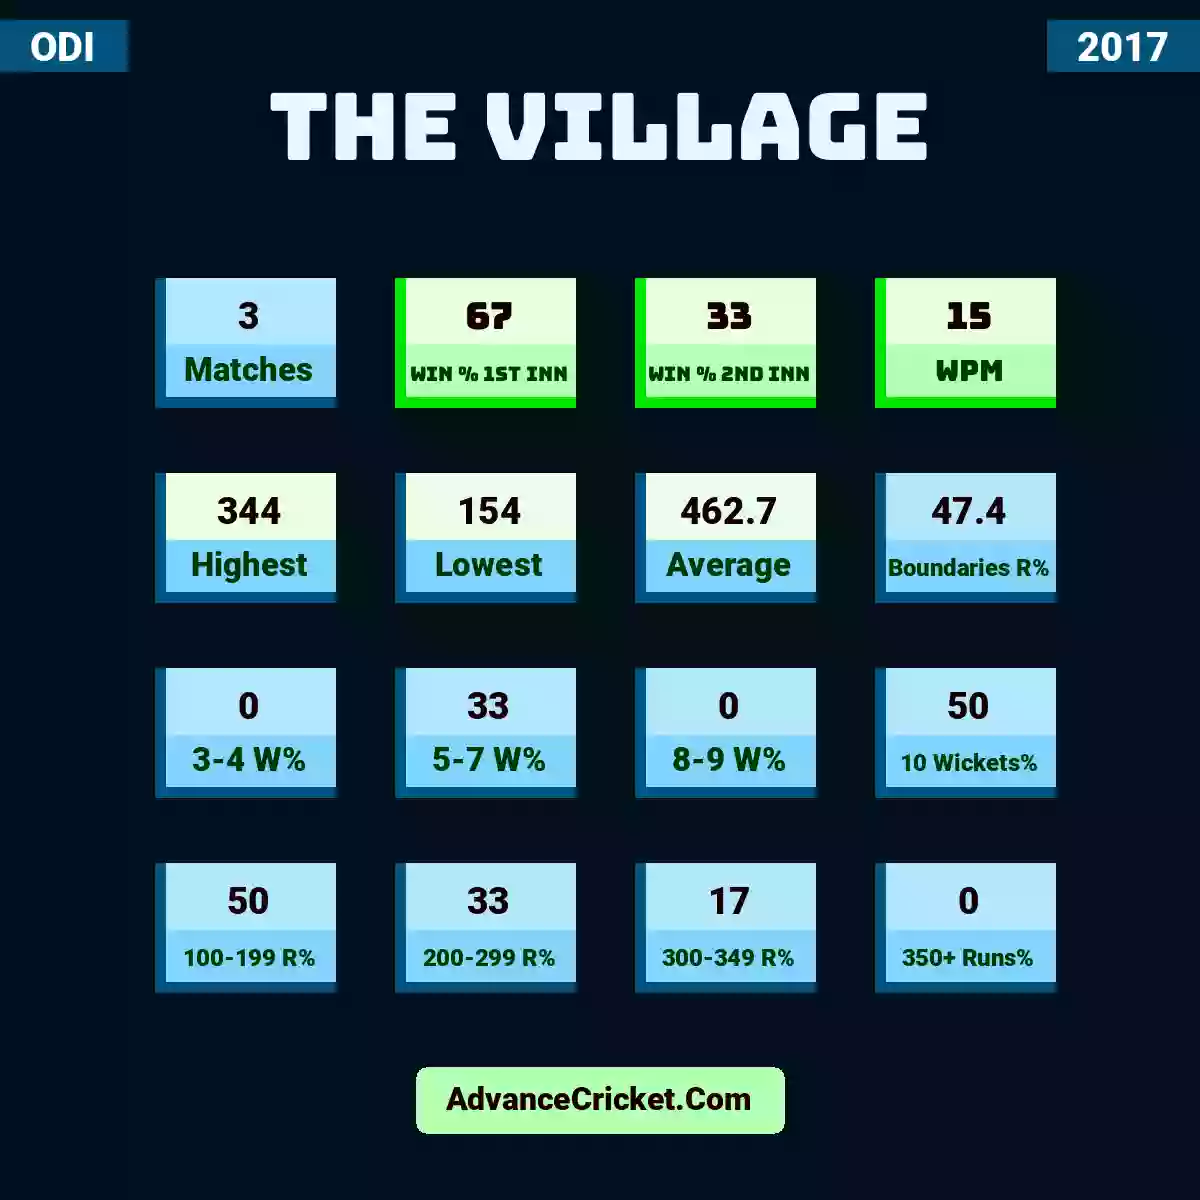 Image showing The Village with Matches: 3, Win % 1st Inn: 67, Win % 2nd Inn: 33, WPM: 15, Highest: 344, Lowest: 154, Average: 462.7, Boundaries R%: 47.4, 3-4 W%: 0, 5-7 W%: 33, 8-9 W%: 0, 10 Wickets%: 50, 100-199 R%: 50, 200-299 R%: 33, 300-349 R%: 17, 350+ Runs%: 0.